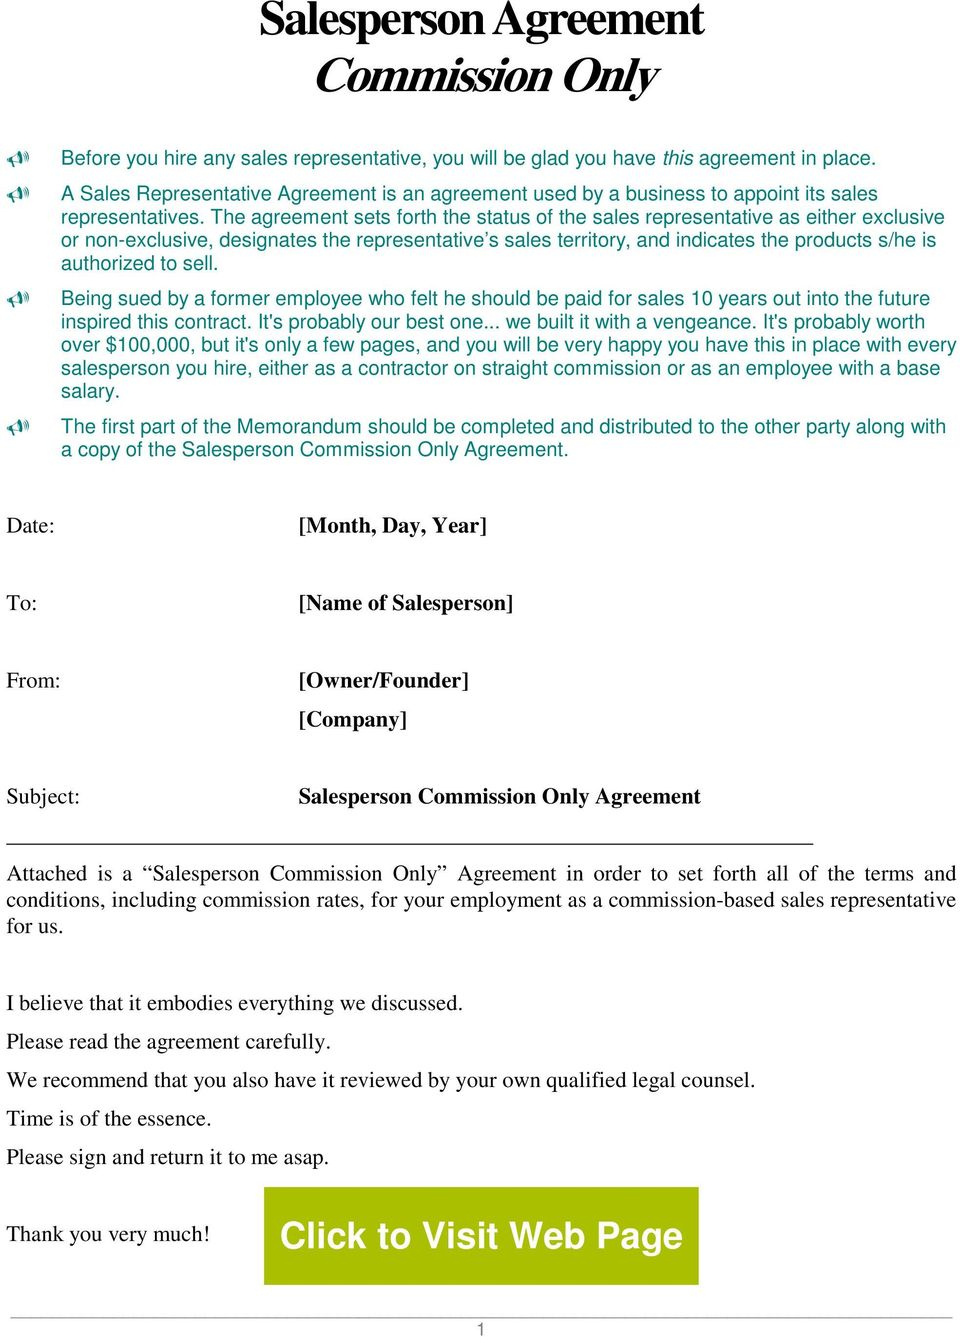 Sales Representative Agreement Salesperson Agreement Commission Only Pdf